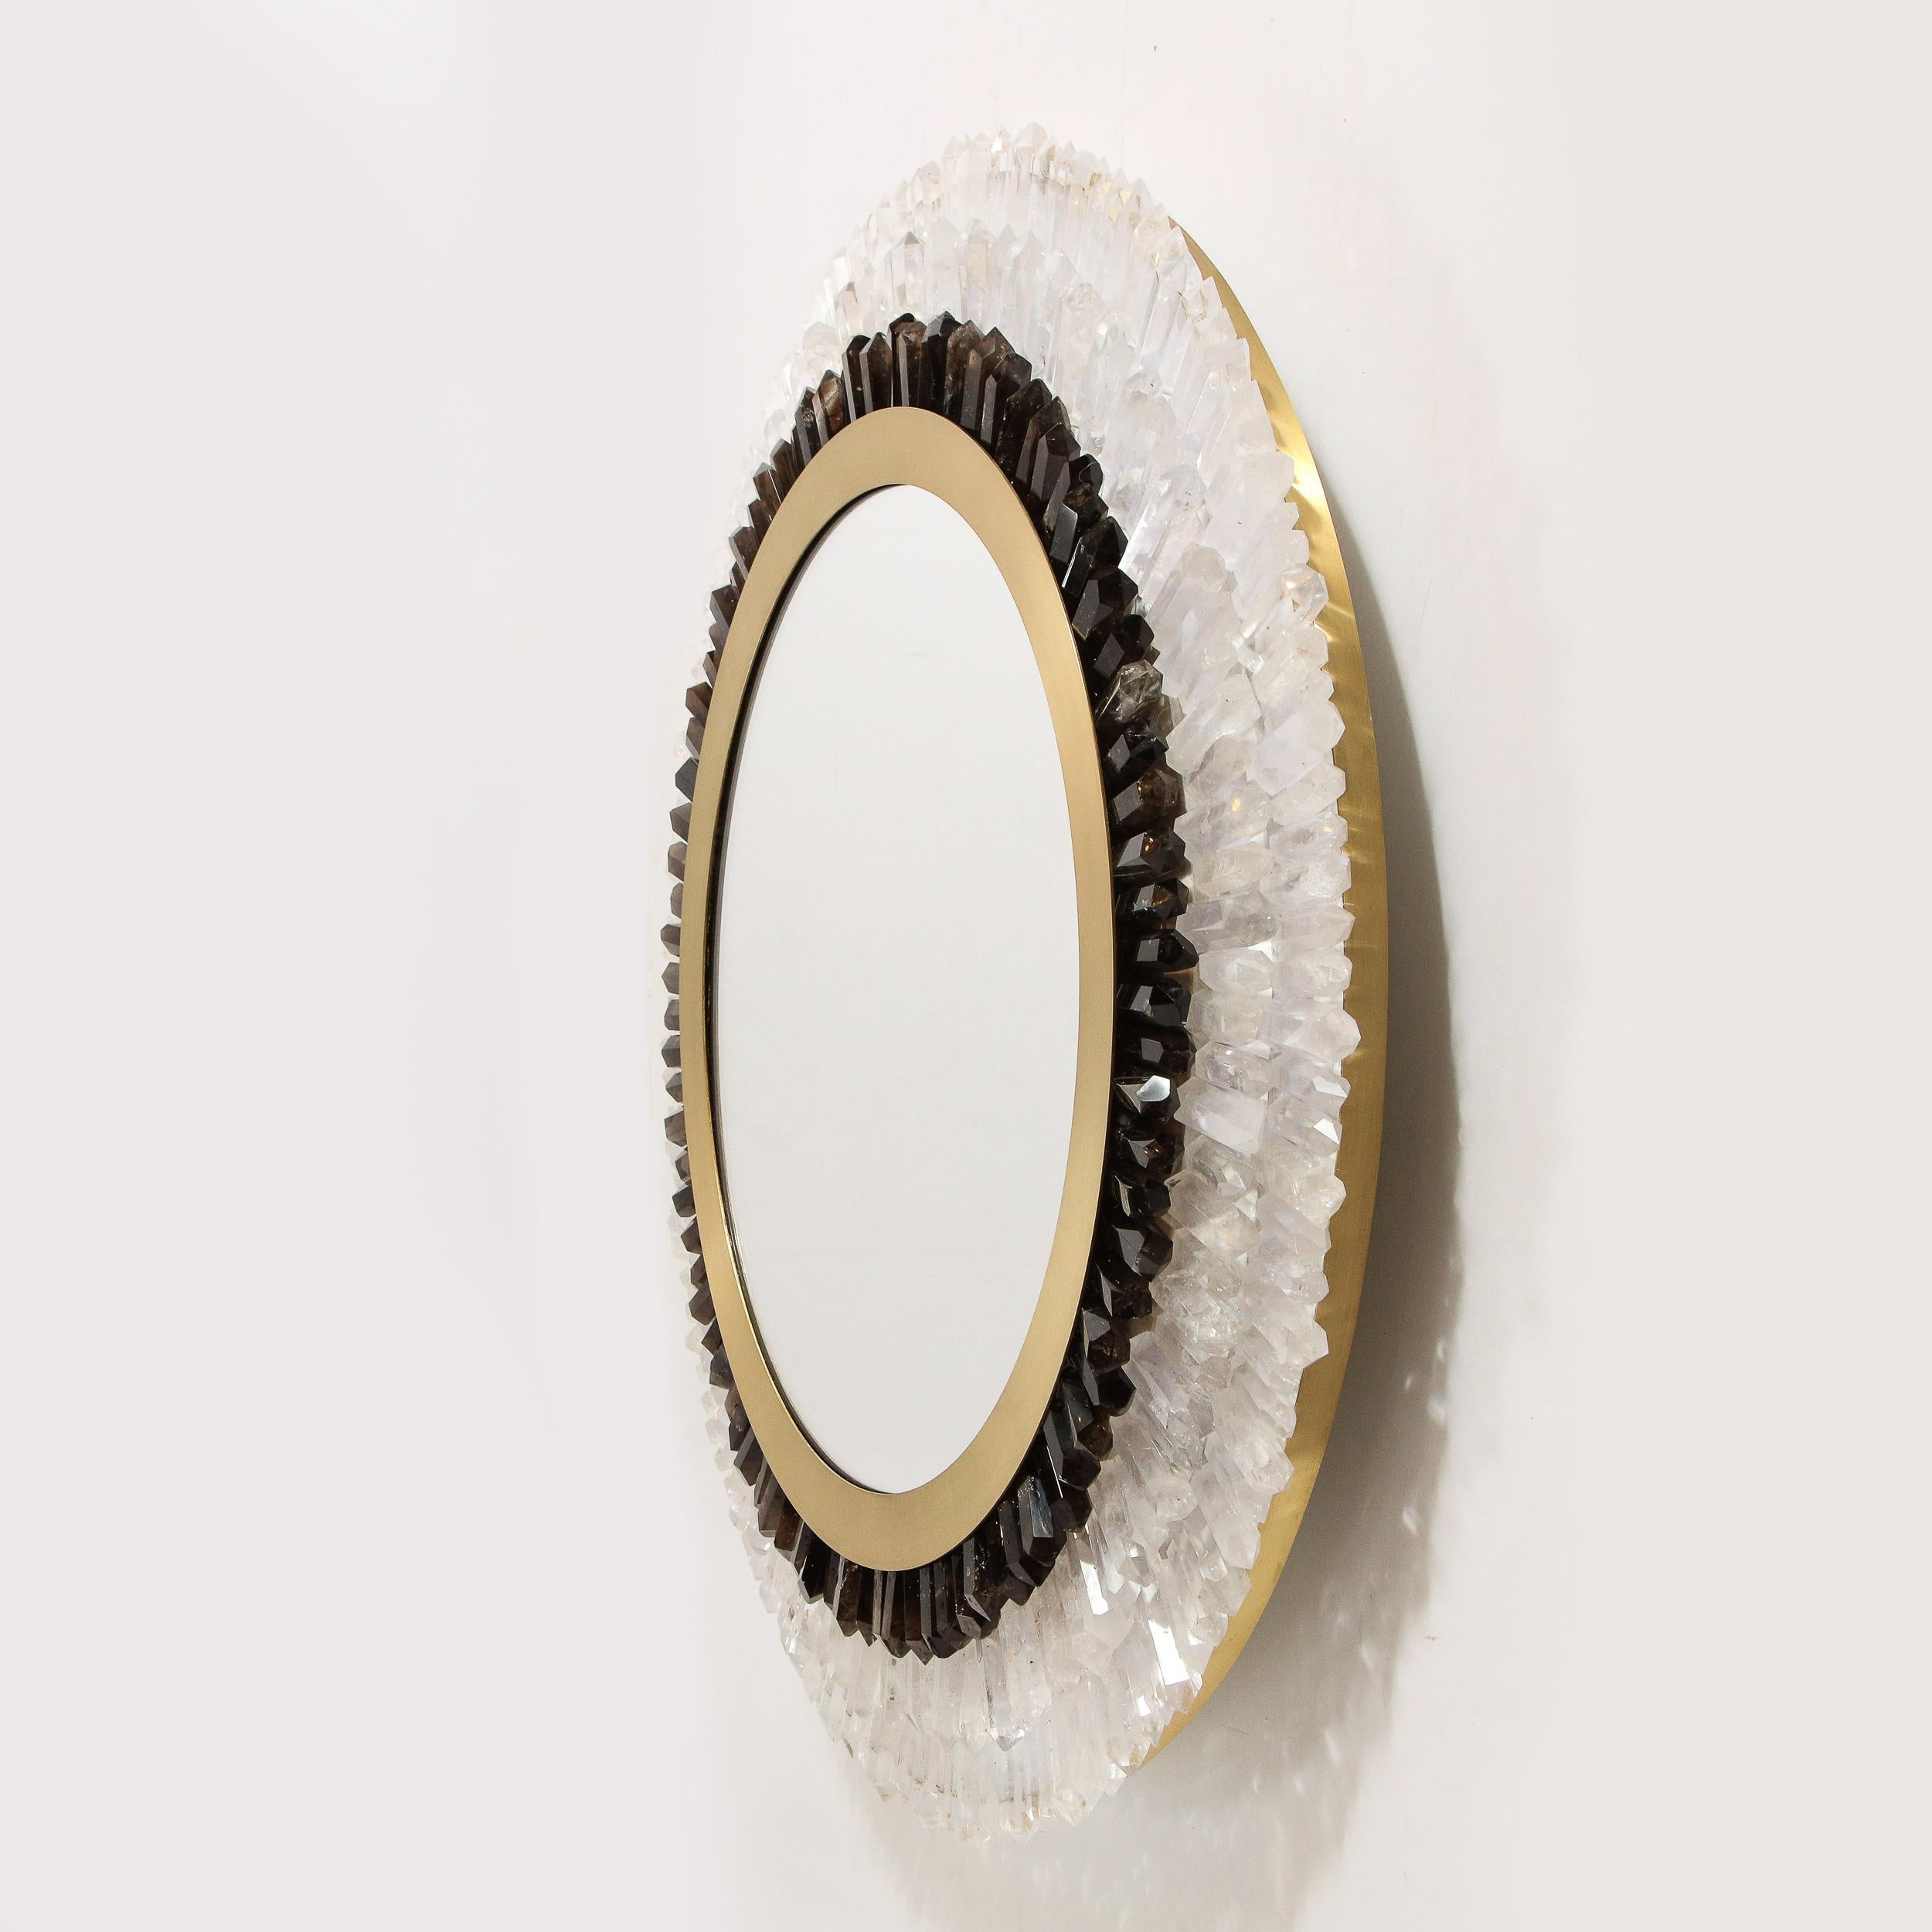 Modernist Brushed Brass, White & Smoked Rock Crystal Circular Wall Mirror For Sale 1